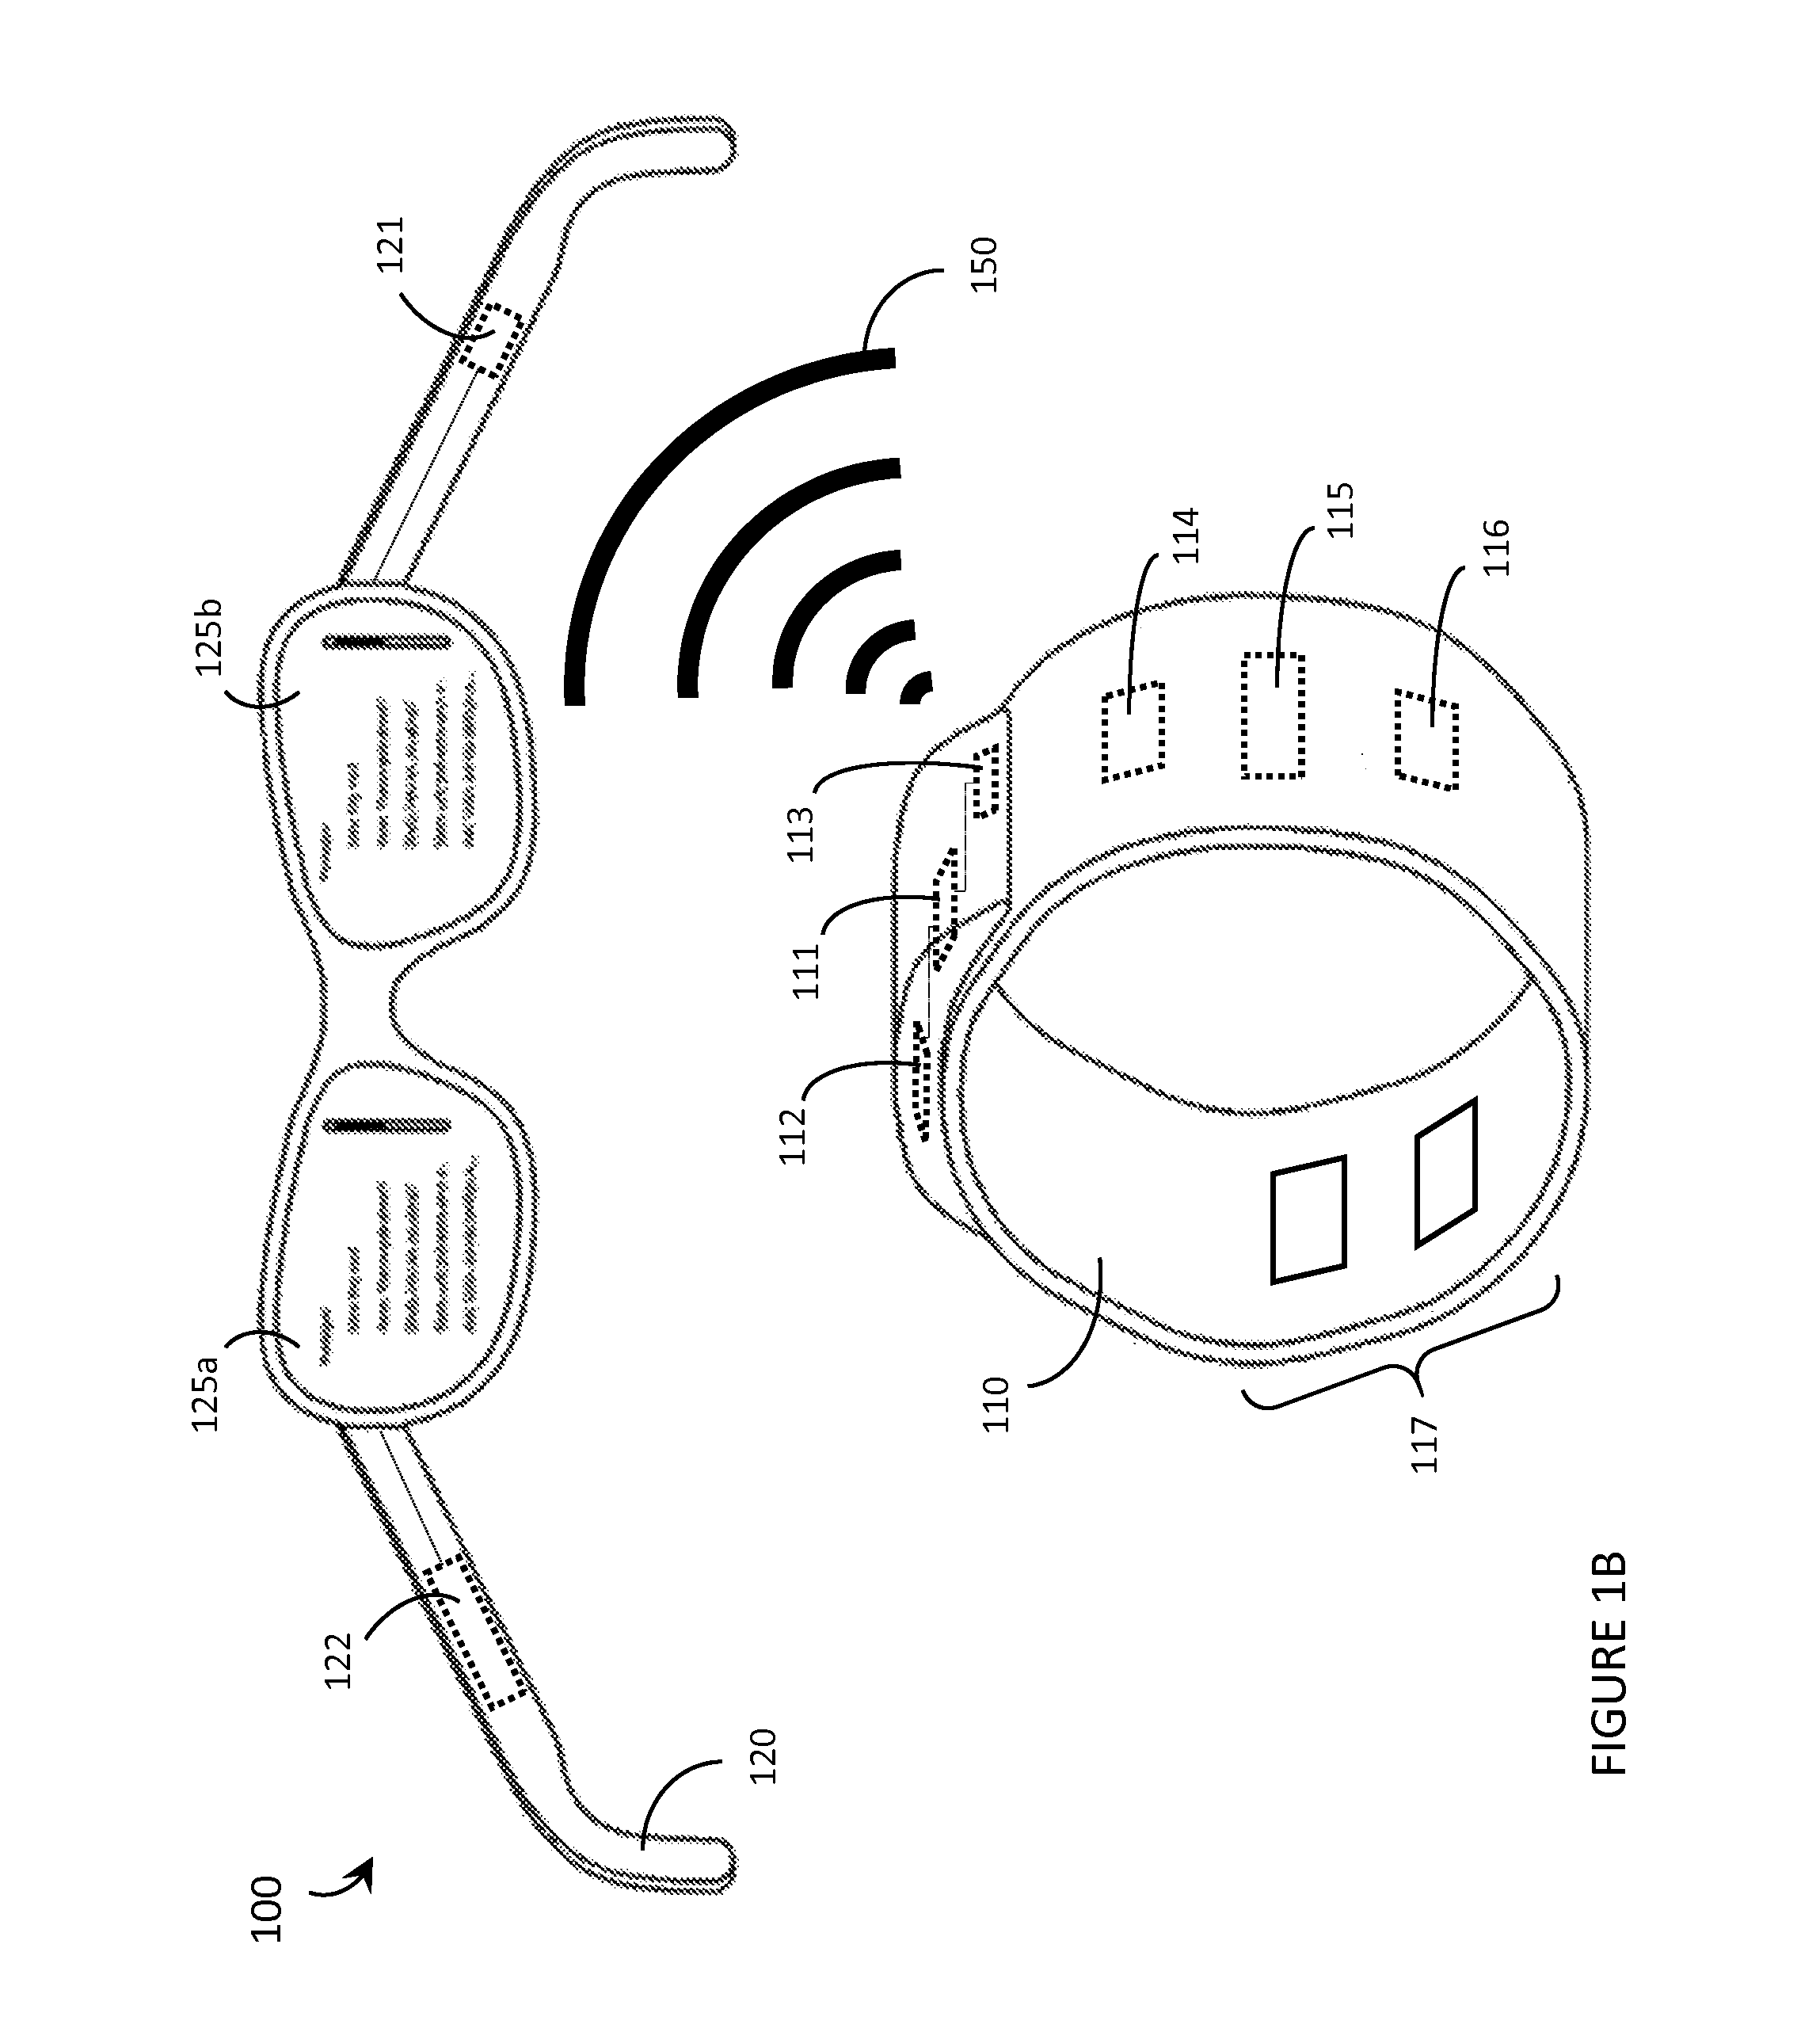 Systems, devices, and methods for wearable computers with heads-up displays